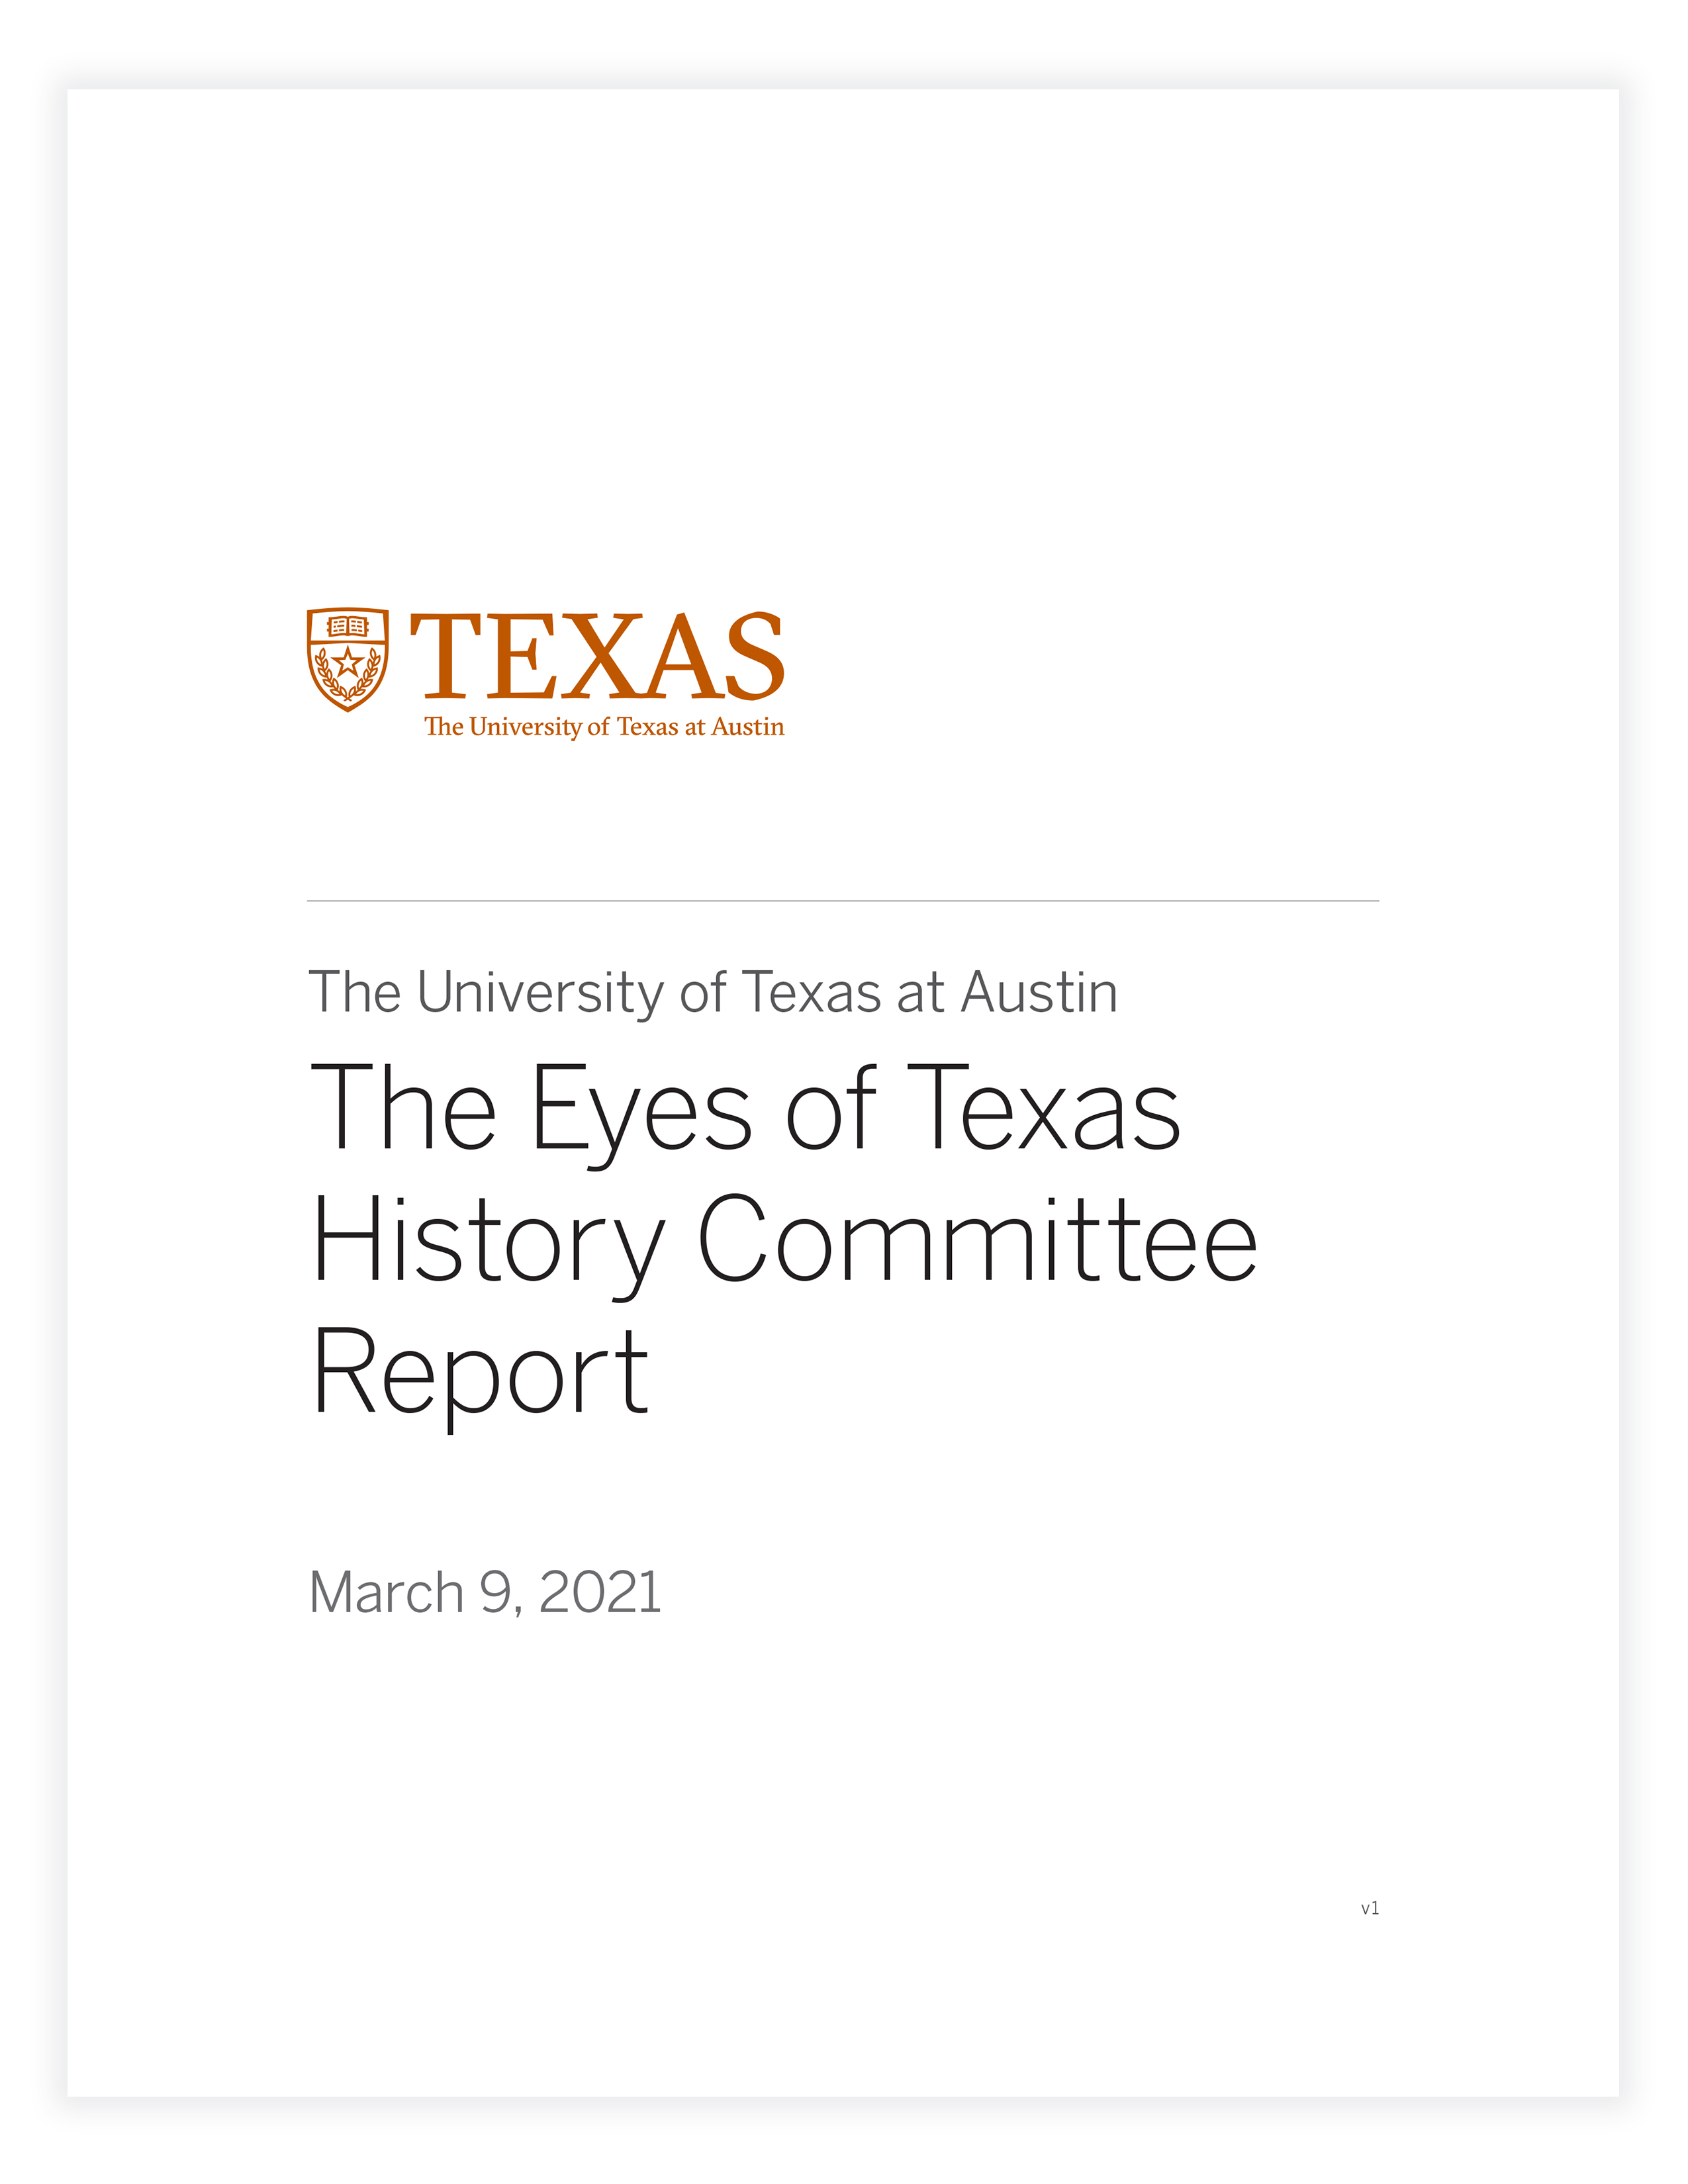 The Eyes of Texas Historical Committee Report